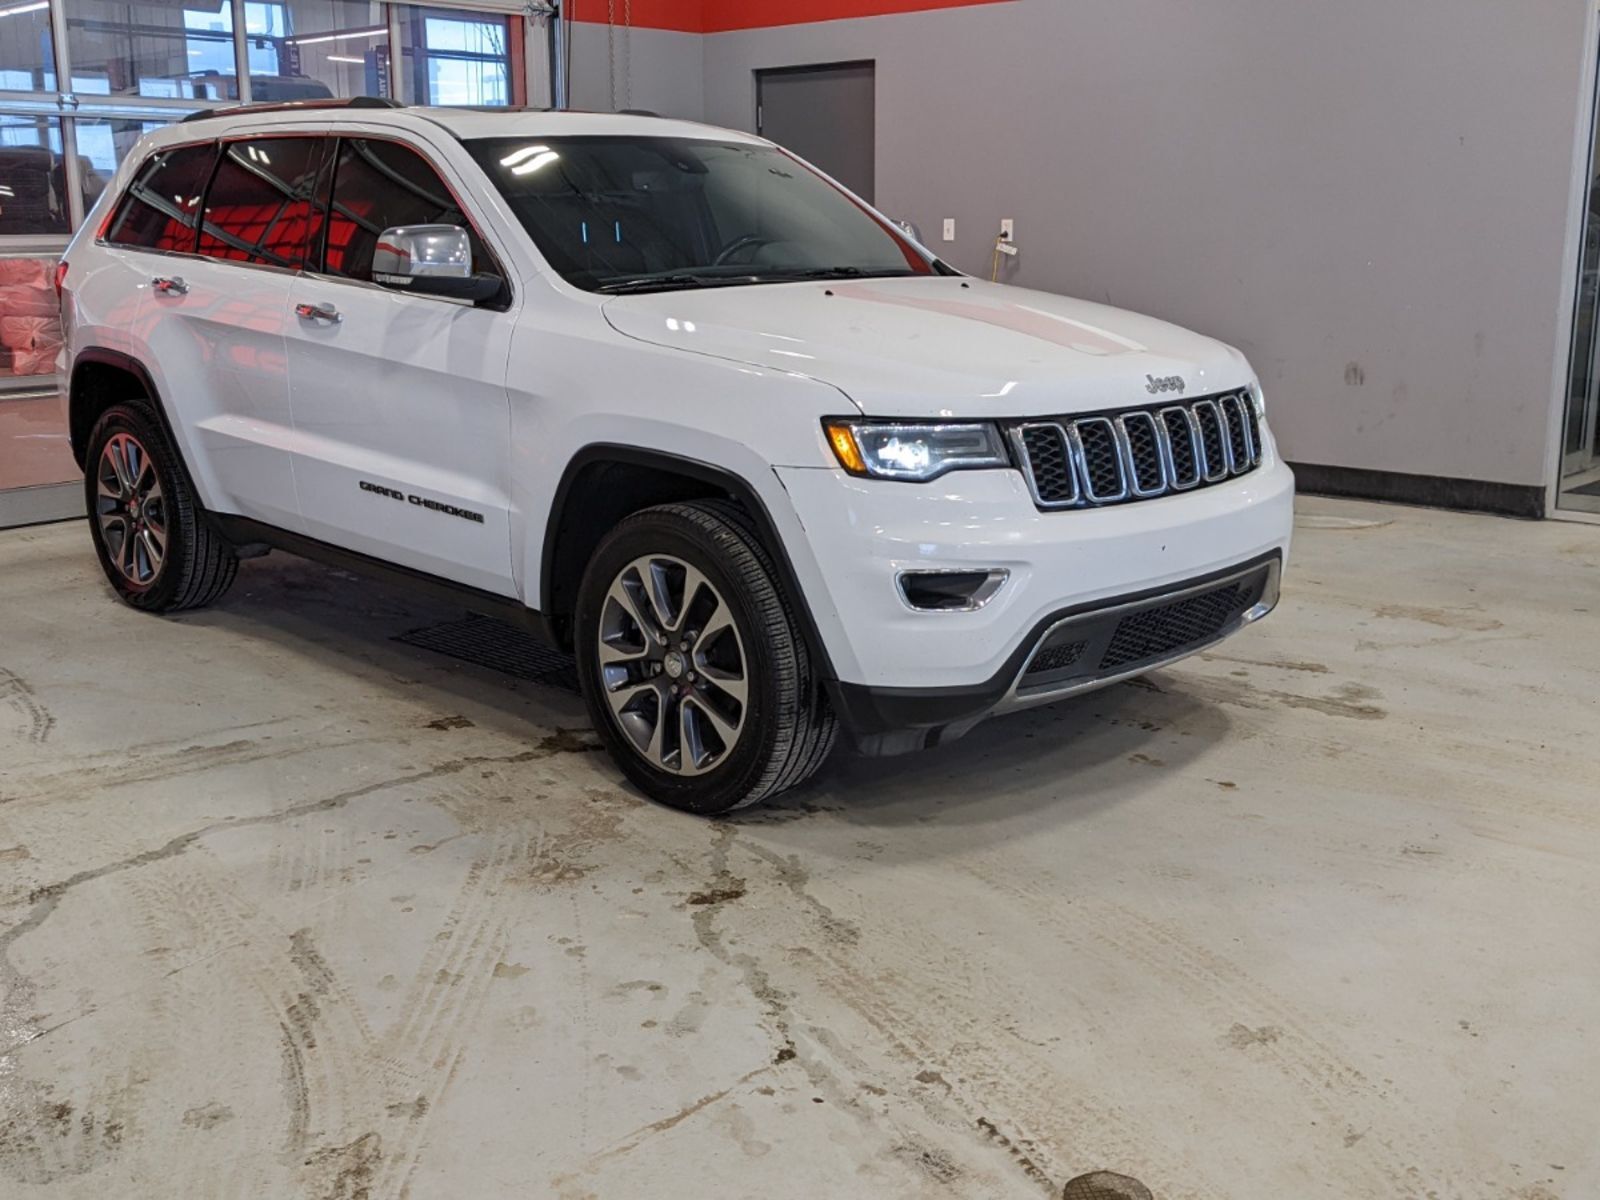 2018 Jeep Grand Cherokee Limited - Leather, sunroof, navigation